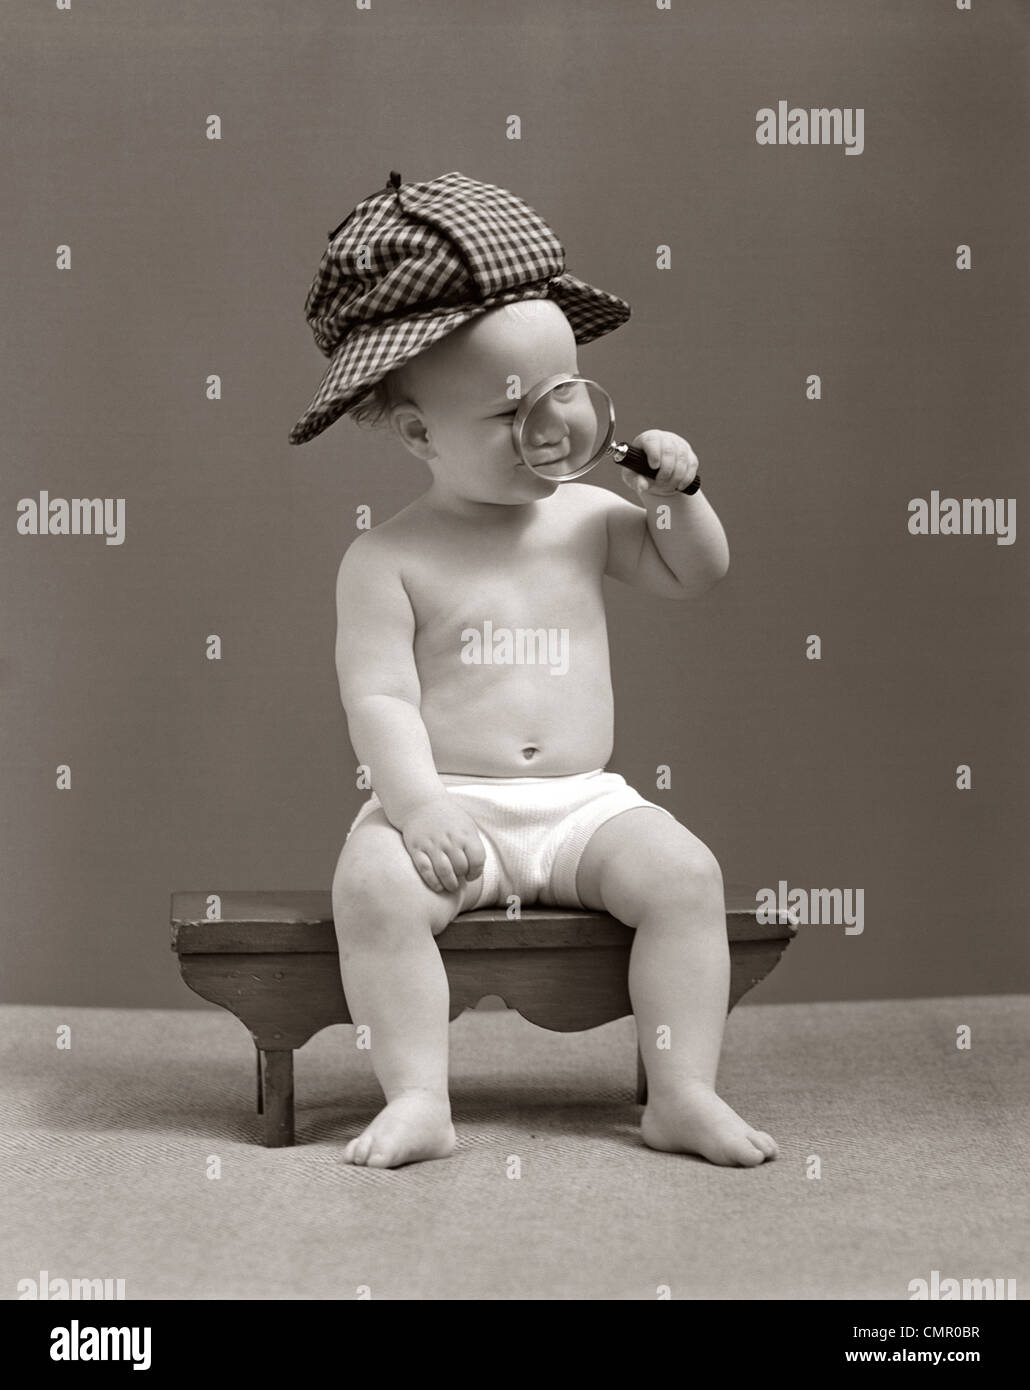 1940s BABY SHERLOCK HOLMES IN DIAPER SITTING ON BENCH WEARING DEER STALKER HAT LOOKING THROUGH MAGNIFYING GLASS Stock Photo